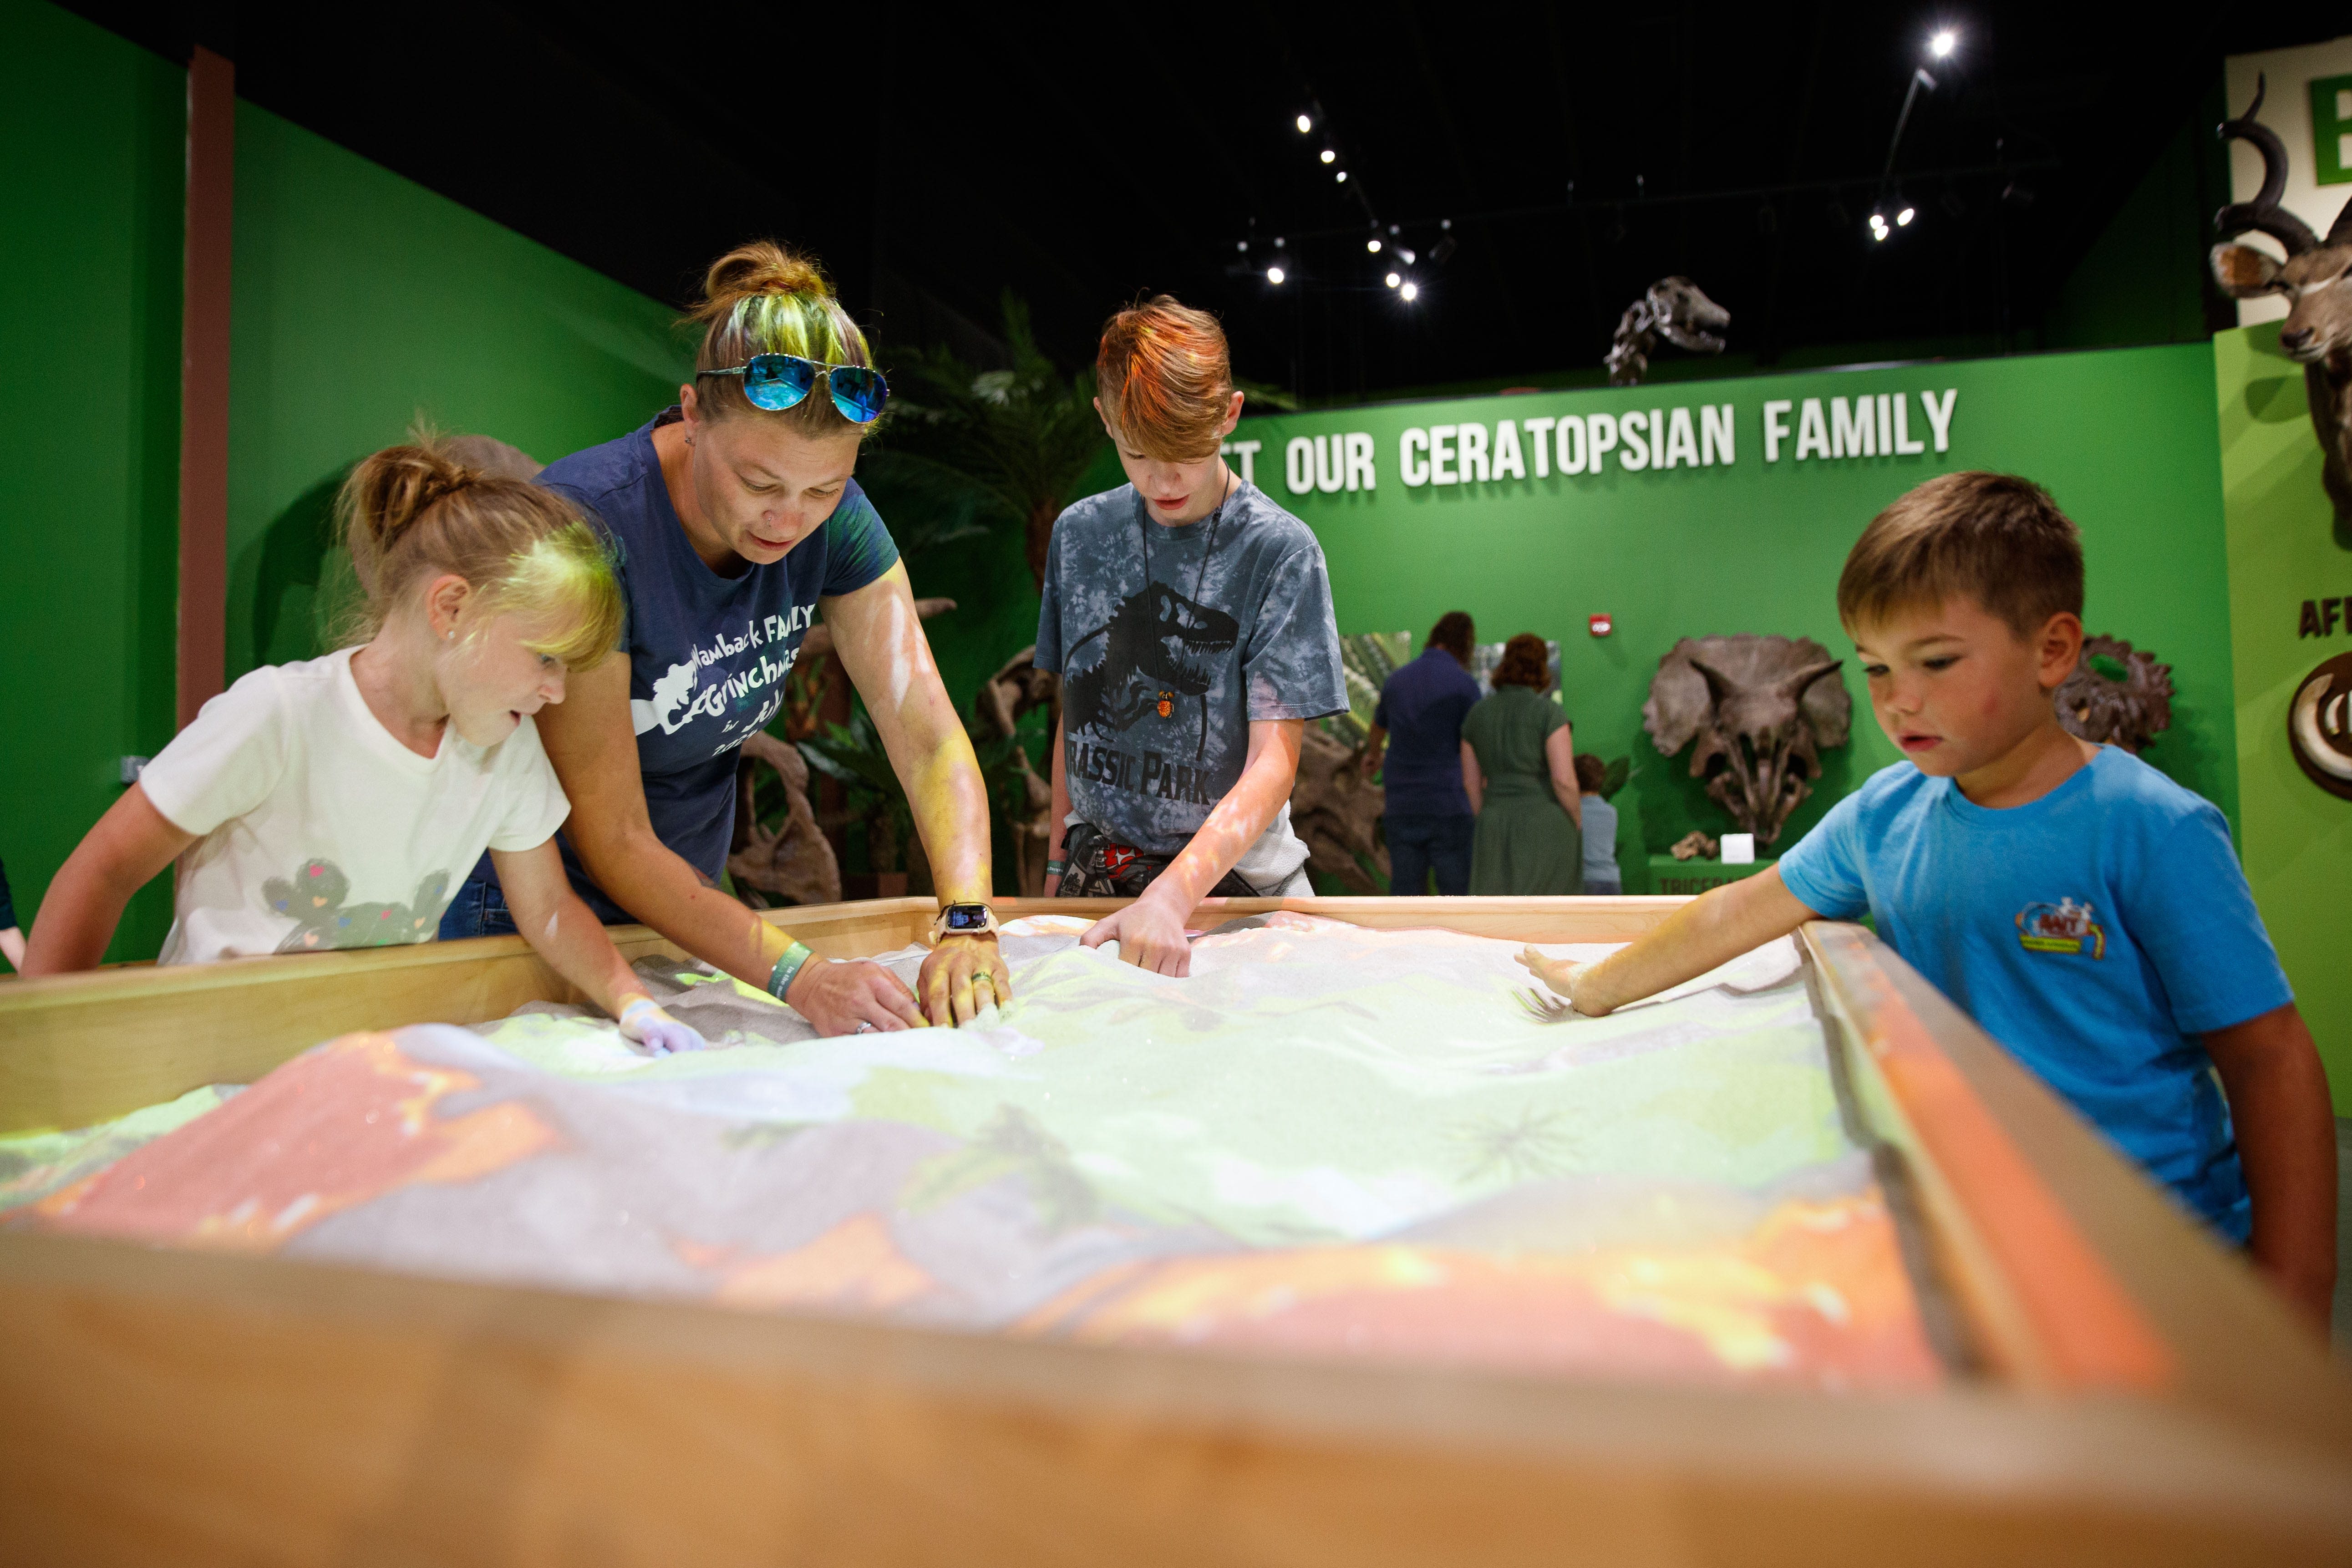 South Bend's Indiana Dinosaur Museum opens as the culmination of digging and dreaming